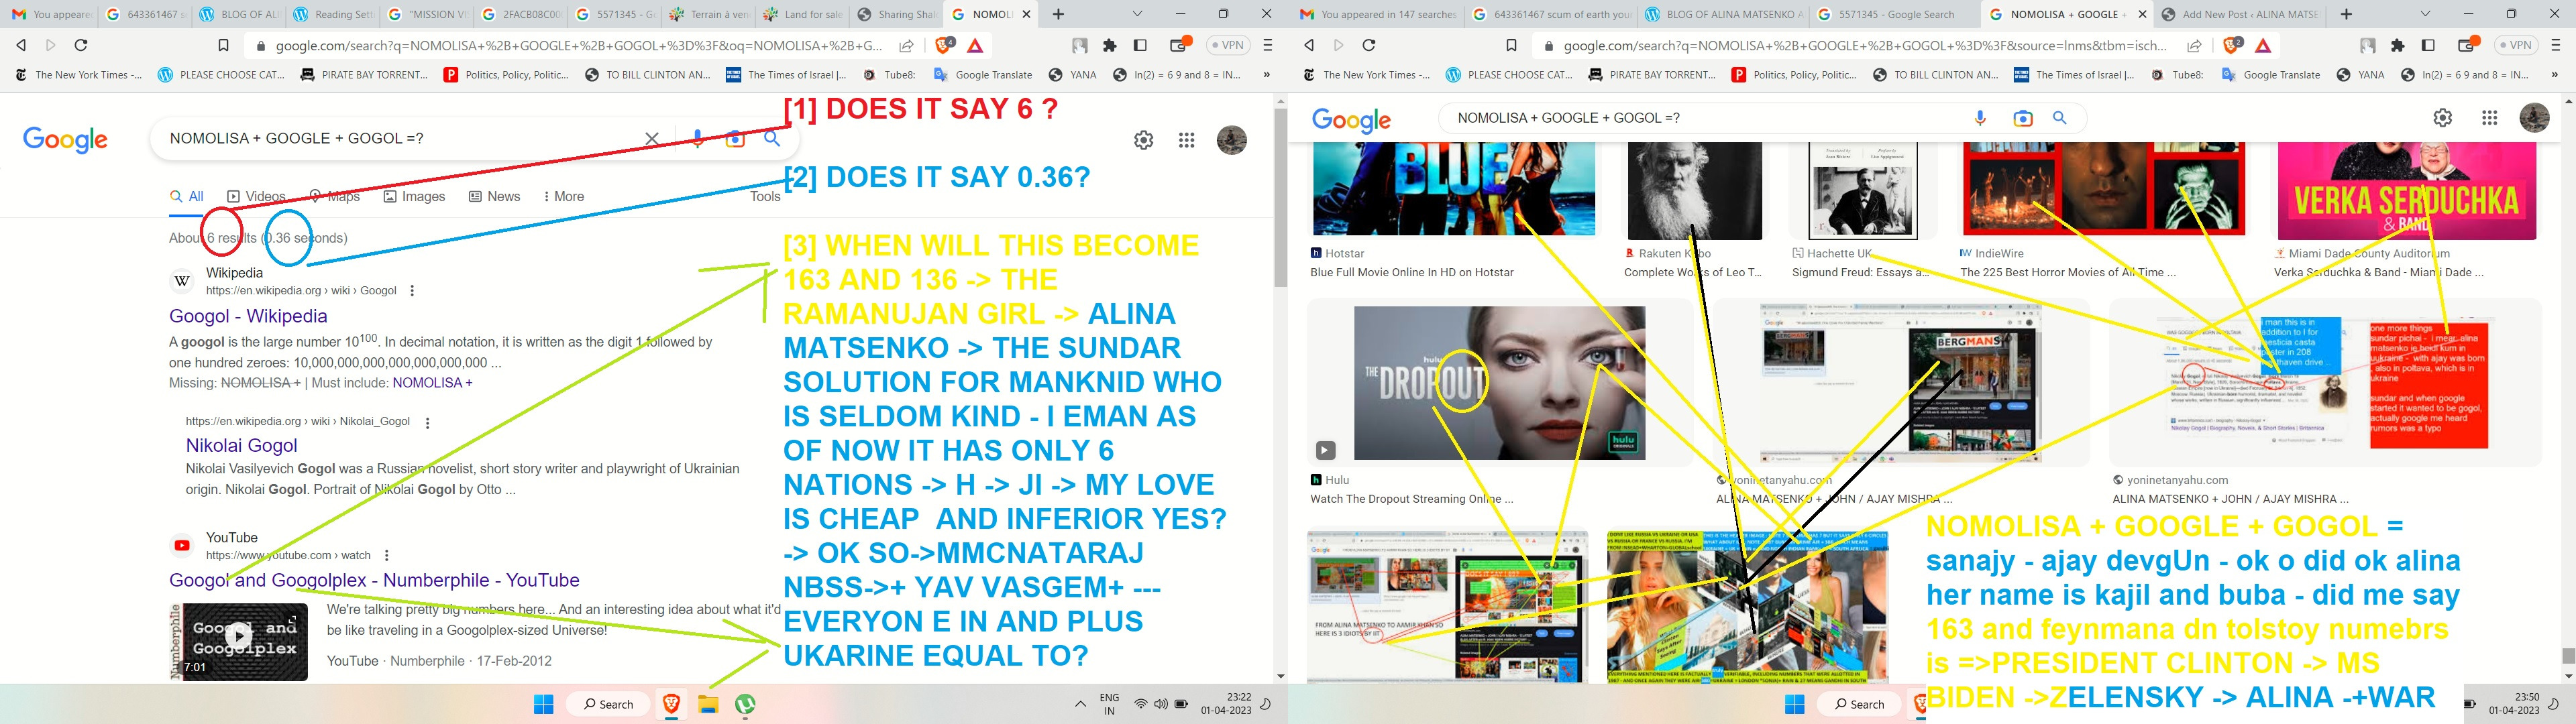 NOMOLISA + GOOGLE + GOGOL =? [1] DOES IT SAY 6 ? [2] DOES IT SAY 0.36? [3] WHEN WILL THIS BECOME 163 AND 136 -> THE RAMANUJAN GIRL -> ALINA MATSENKO -> THE SUNDAR SOLUTION FOR MANKNID WHO IS SELDOM KIND - I EMAN AS OF NOW IT HAS ONLY 6 NATIONS -> H -> JI -> MY LOVE IS CHEAP AND INFERIOR YES? -> OK SO->MMCNATARAJ NBSS->+ YAV VASGEM+ --- EVERYON E IN AND PLUS UKARINE EQUAL TO? alina matsneko ajay mishra tramanujan and ramanujan real loeve story andthe irodov plus ramanujan plus clinton item song for netanayhu -> is me say - biden - macron and insead and iit kanour and wharton nd heberw uievristy and harvard and sorborbrone nd china - tinshua and colvin collge and - i cant tye mroe -> zelenesky - did me say - alina memsaheb not alina -> kak dila moi drig -> poltava -> paris -> and whats teh ebst otehr p word s u now - did me ay madarchis -> hidnus nd jews 0deid mesay something? this is caled 643361467 and misison vison story and communication and its not sissy cybery war biut beyond MISSION-VISION-STORY-AND-COMMUNICATION NOMOLISA + GOOGLE + GOGOL = sanajy - ajay devgUn - ok o did ok alina her name is kajil and buba - did me say 163 and feynmana dn tolstoy numebrs is =>PRESIDENT CLINTON -> MS BIDEN ->ZELENSKY -> ALINA -+WAR NOMOLISA + GOOGLE + GOGOL =ALINA MATSENKLO TRAMANUJAN ANDN RAMANUJAM GIRL - THE YONI NETANYAHU SHIVA IRODOV - TOLSTOY GANDHI CLINTON MISHRS BIDEN SSANJAY DUTT AJAY DEVGN H AND EEVRY NUMBERS